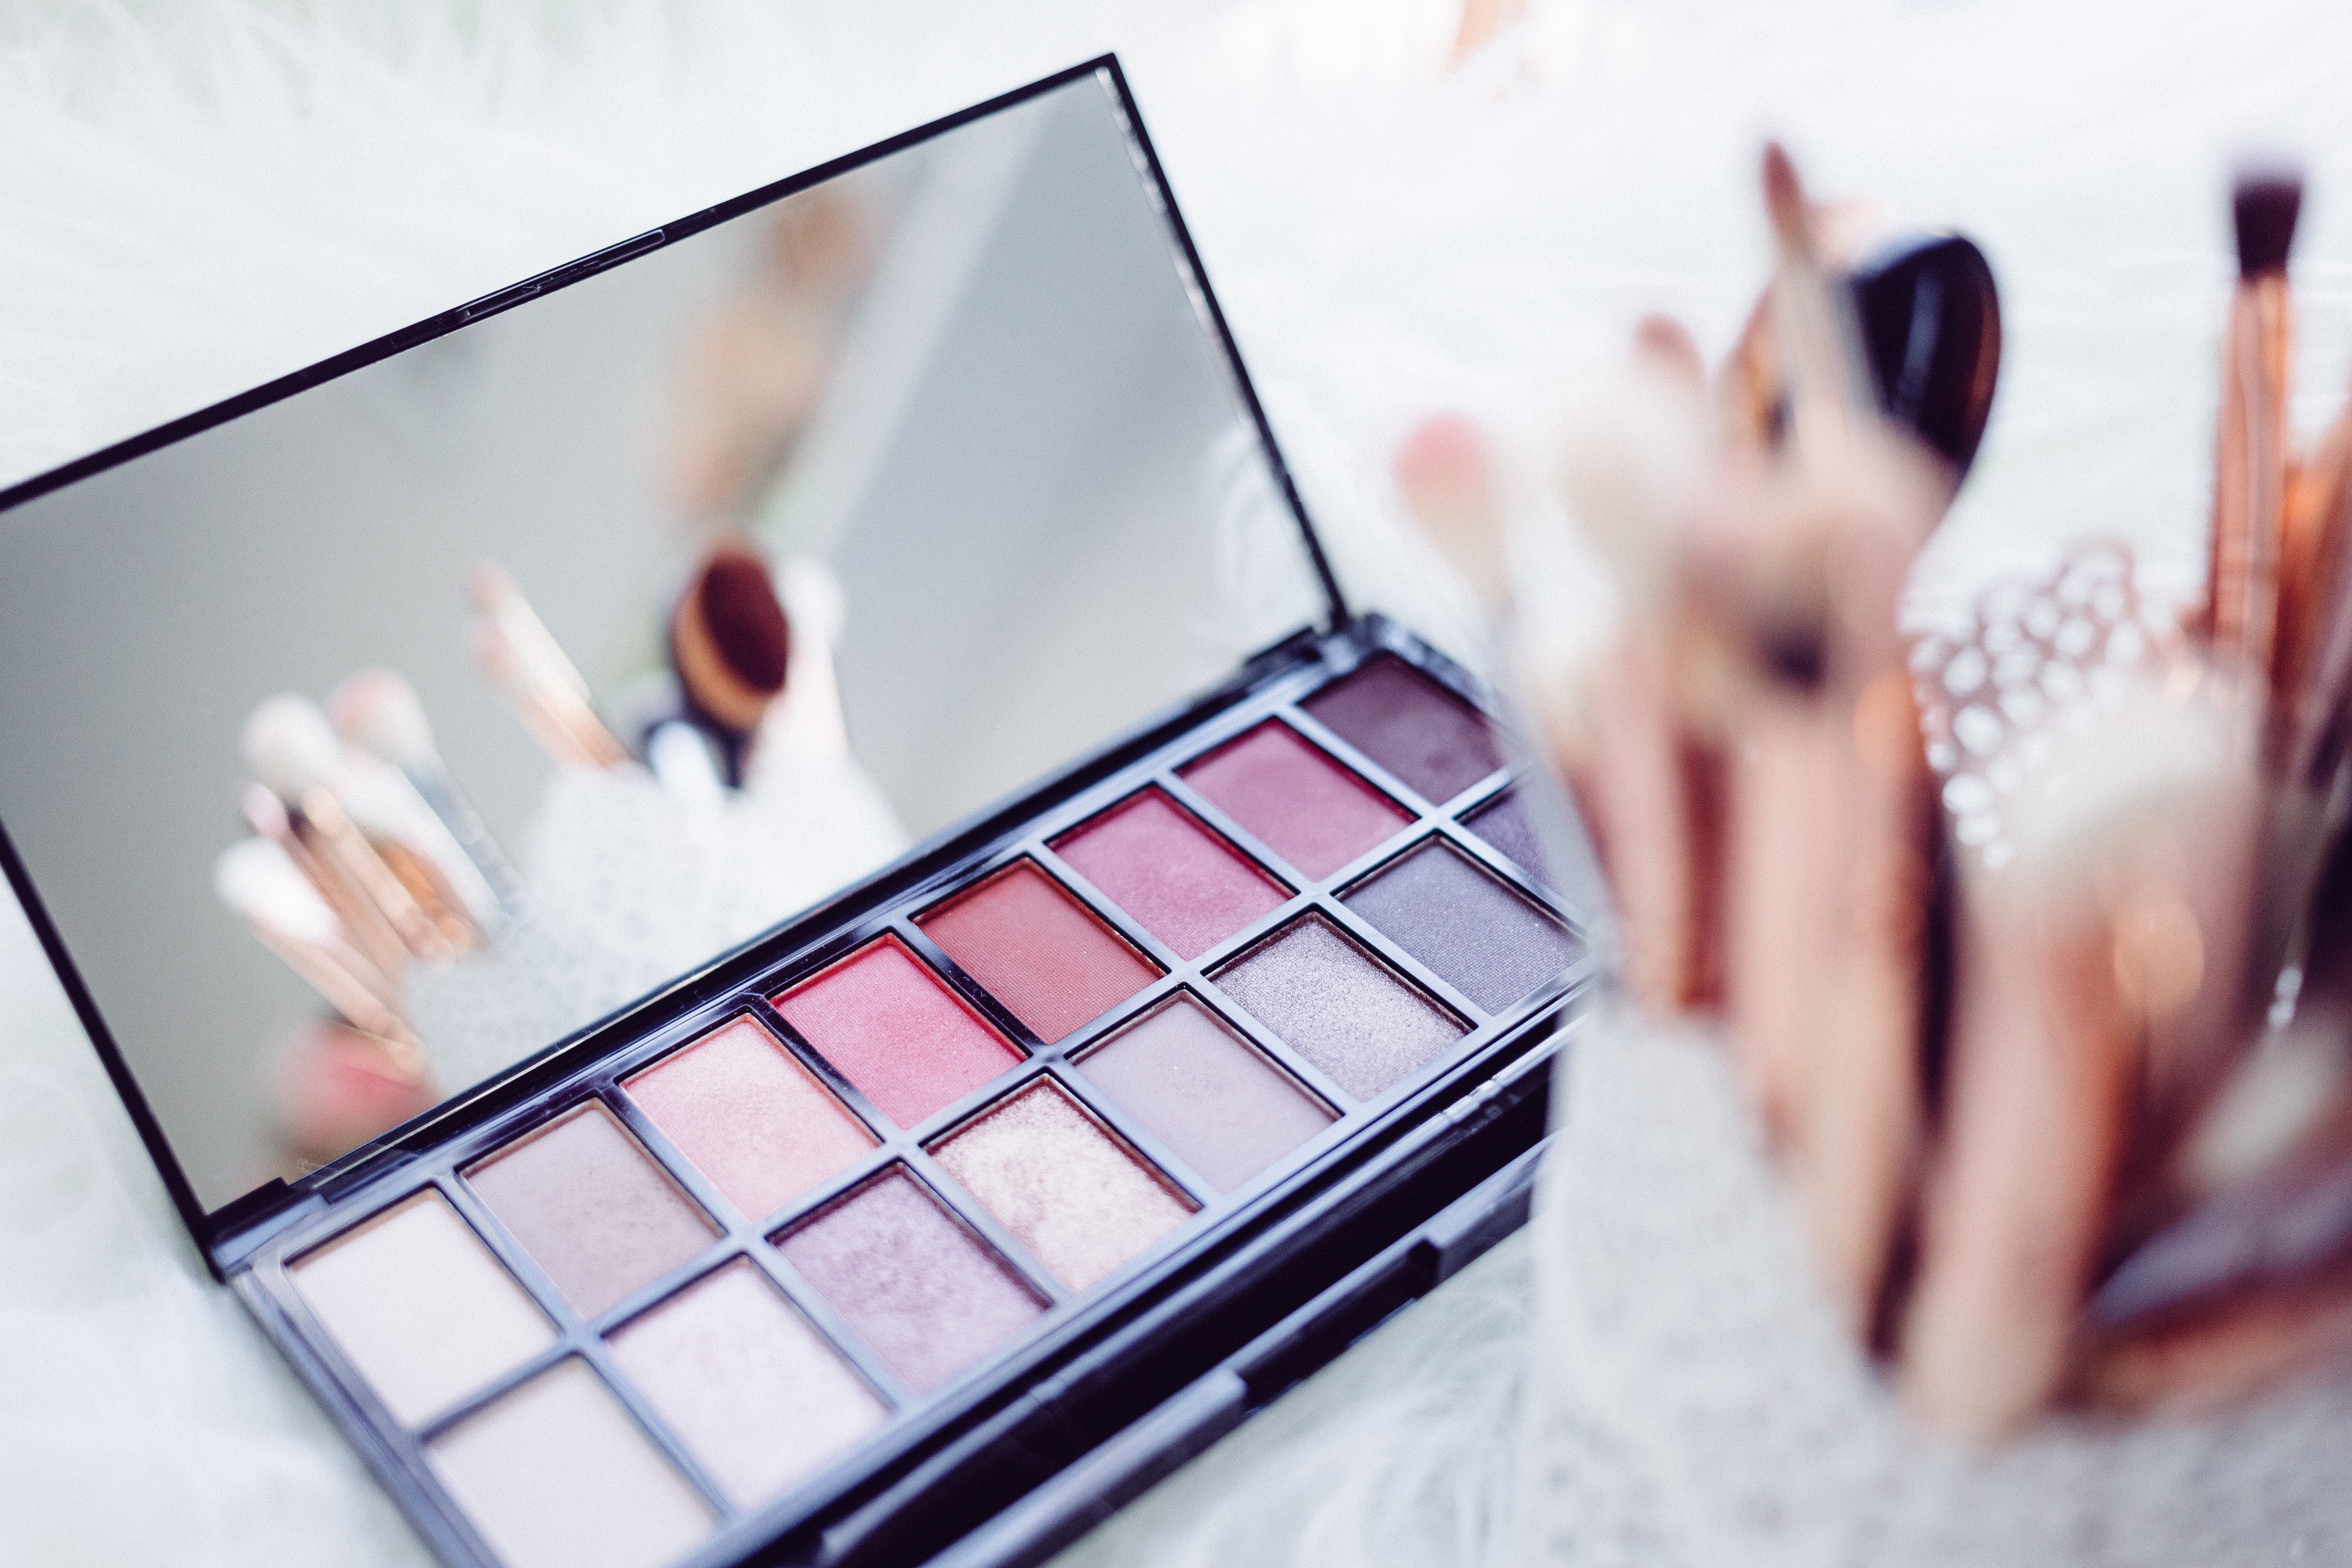 Find Hair And Makeup Artists in   Edwardstown Get the best prices from 2,000+ of the most reviewed Hair And Makeup Artists  near Edwardstown. Pick from mobile stylists or salons.